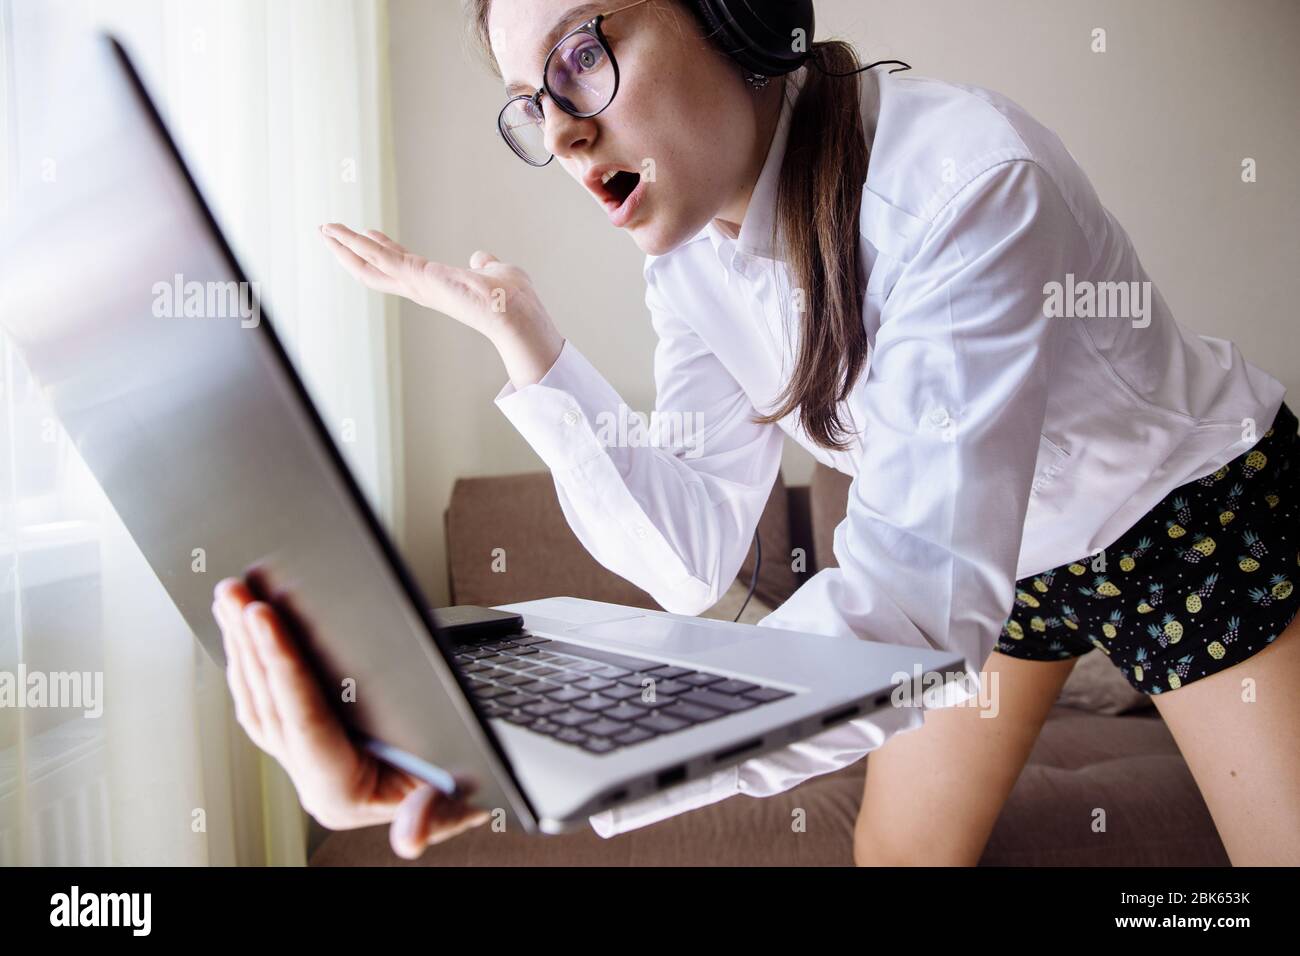 The girl in a home office clothes talking on the web camera. The emotional girl says something and shows her hands.  Stock Photo